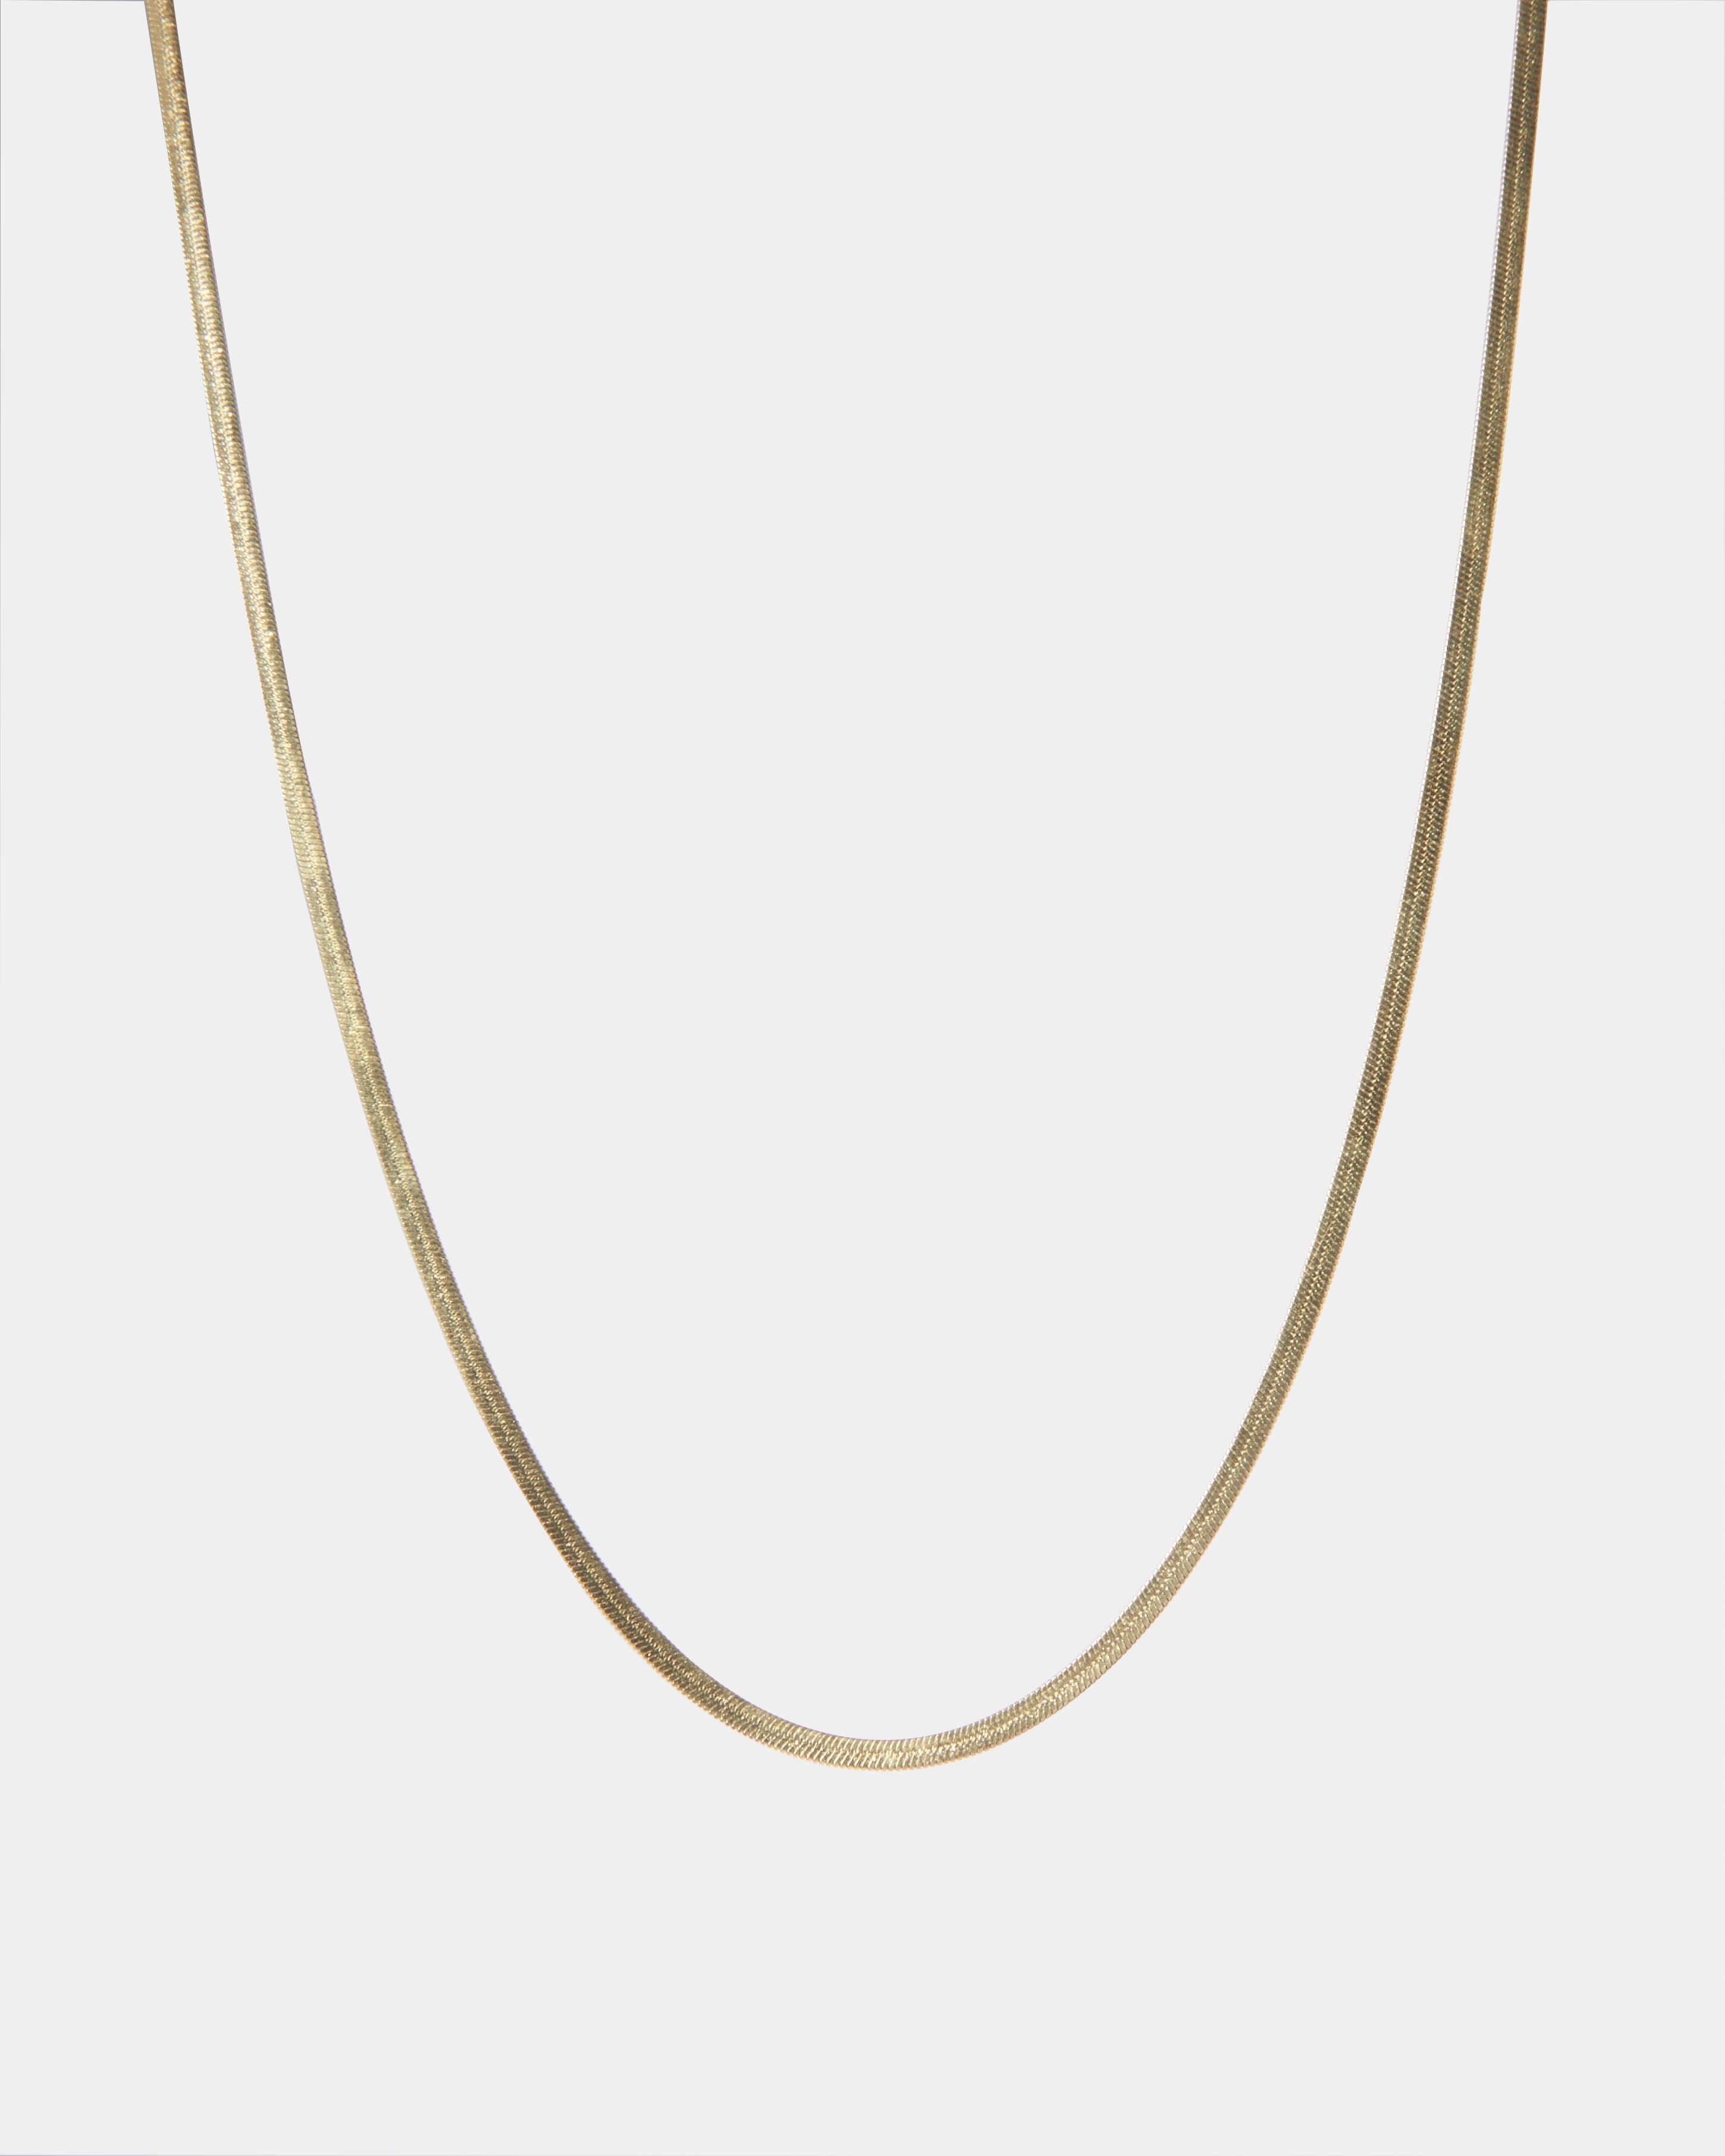 HISS & TWIST CHOKER - THE LIMELY